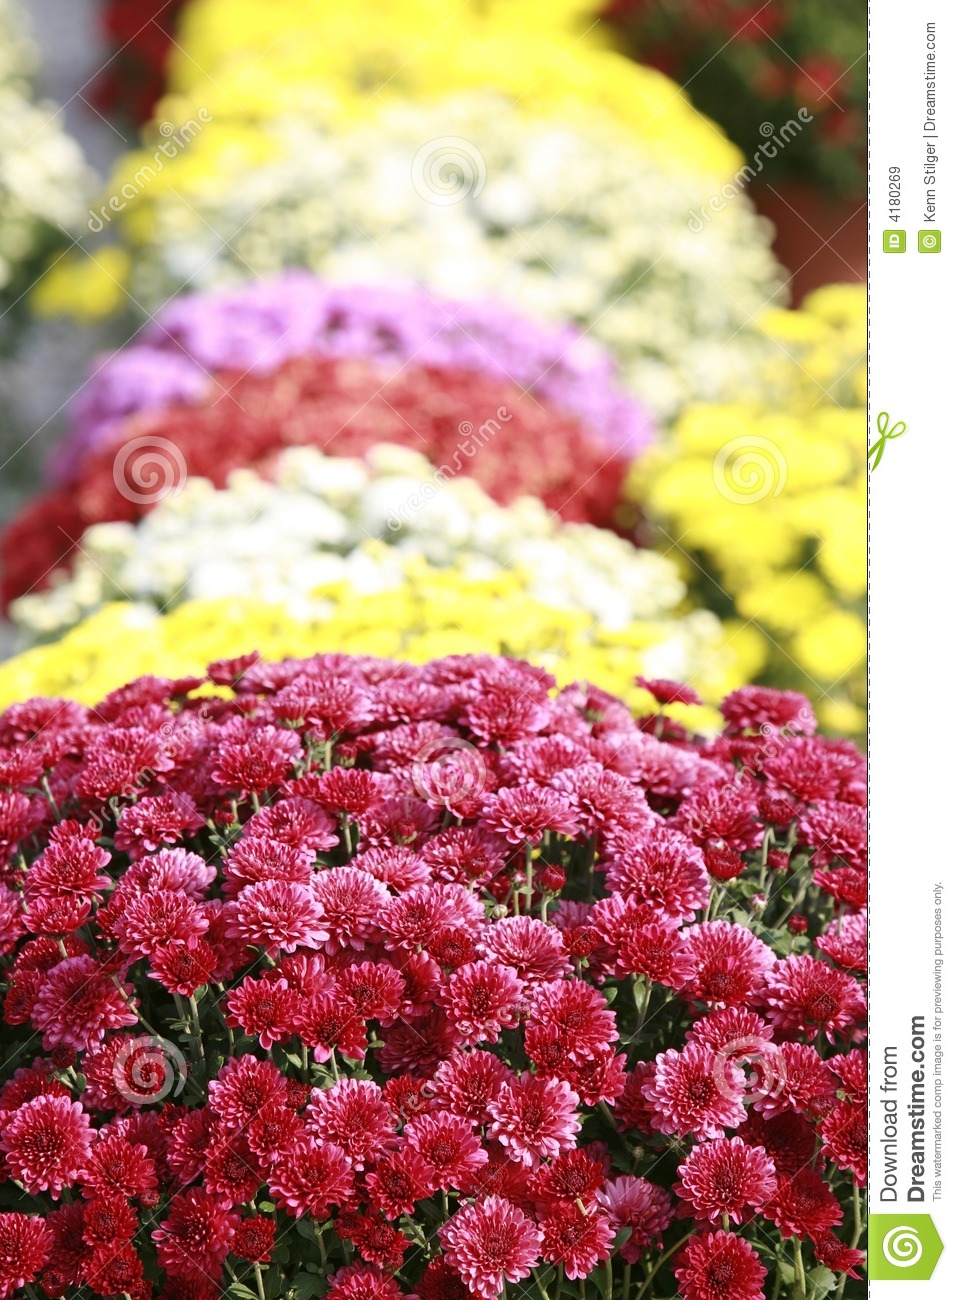 Fall Mums Royalty Free Stock Images   Image  4180269